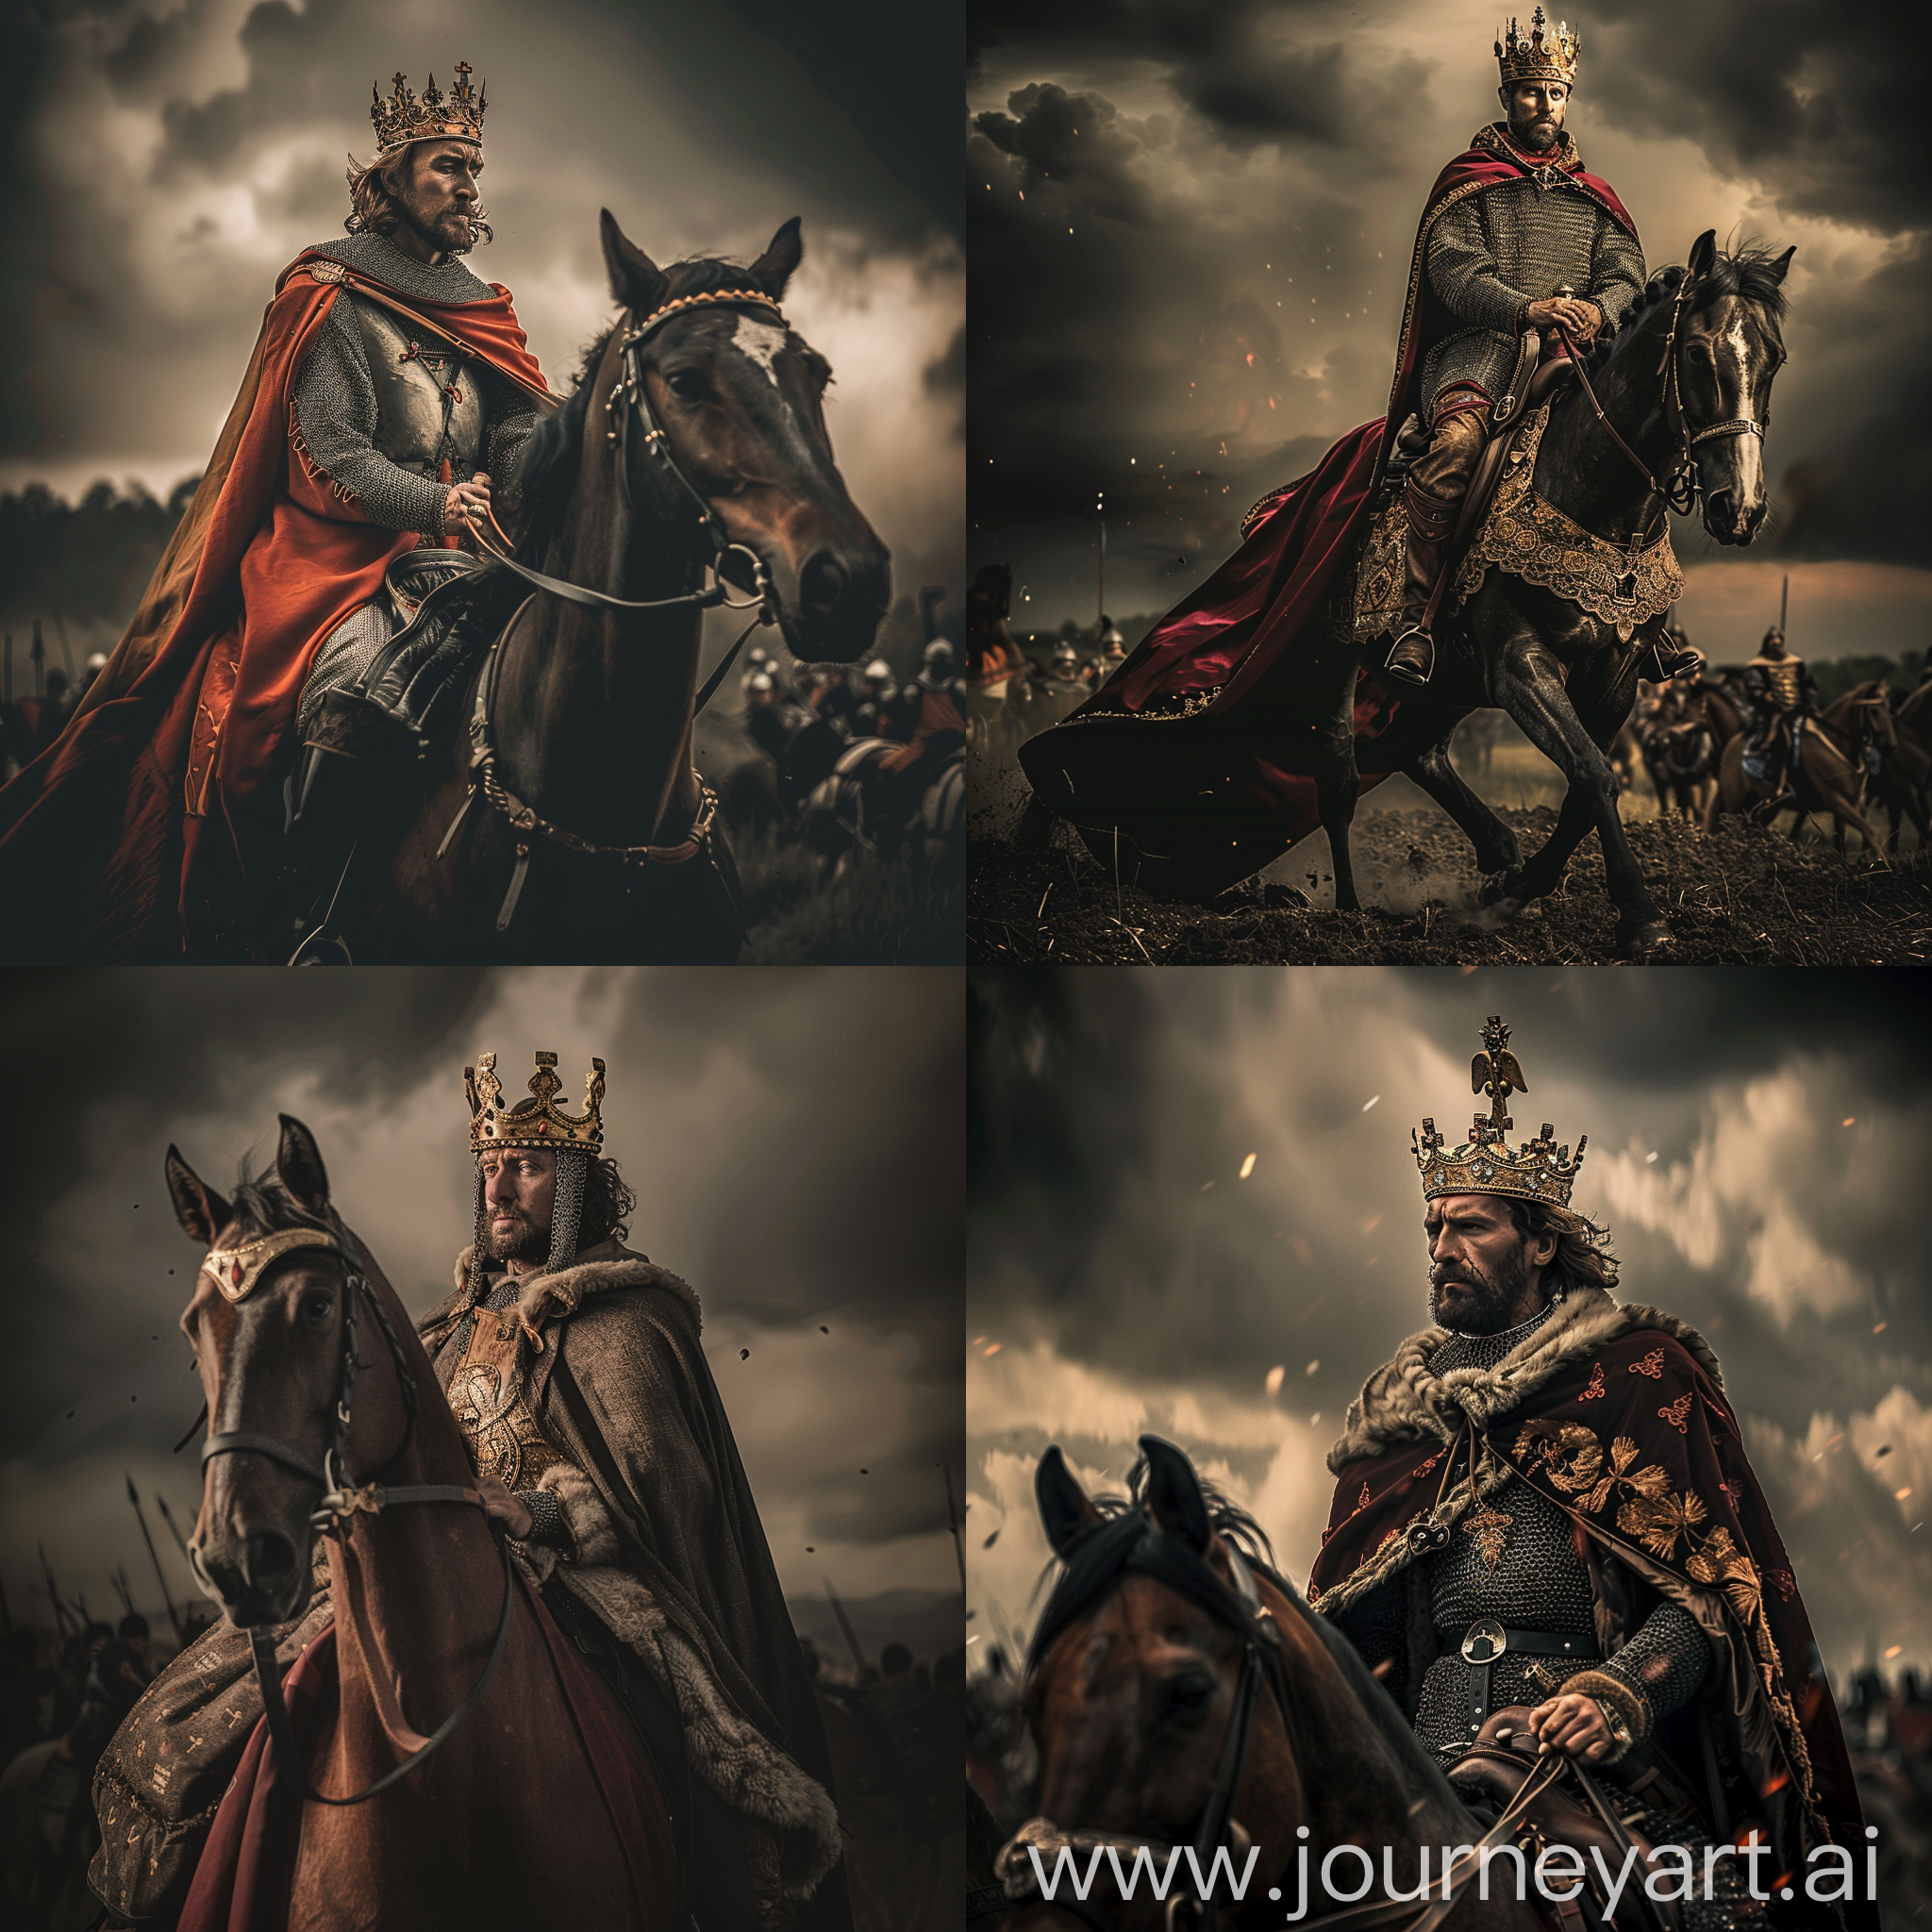 King Richard the Lionheart, on horse, wearing king attire, crown and cape, brave, depth of field, medieval battle field, dramatic lighting